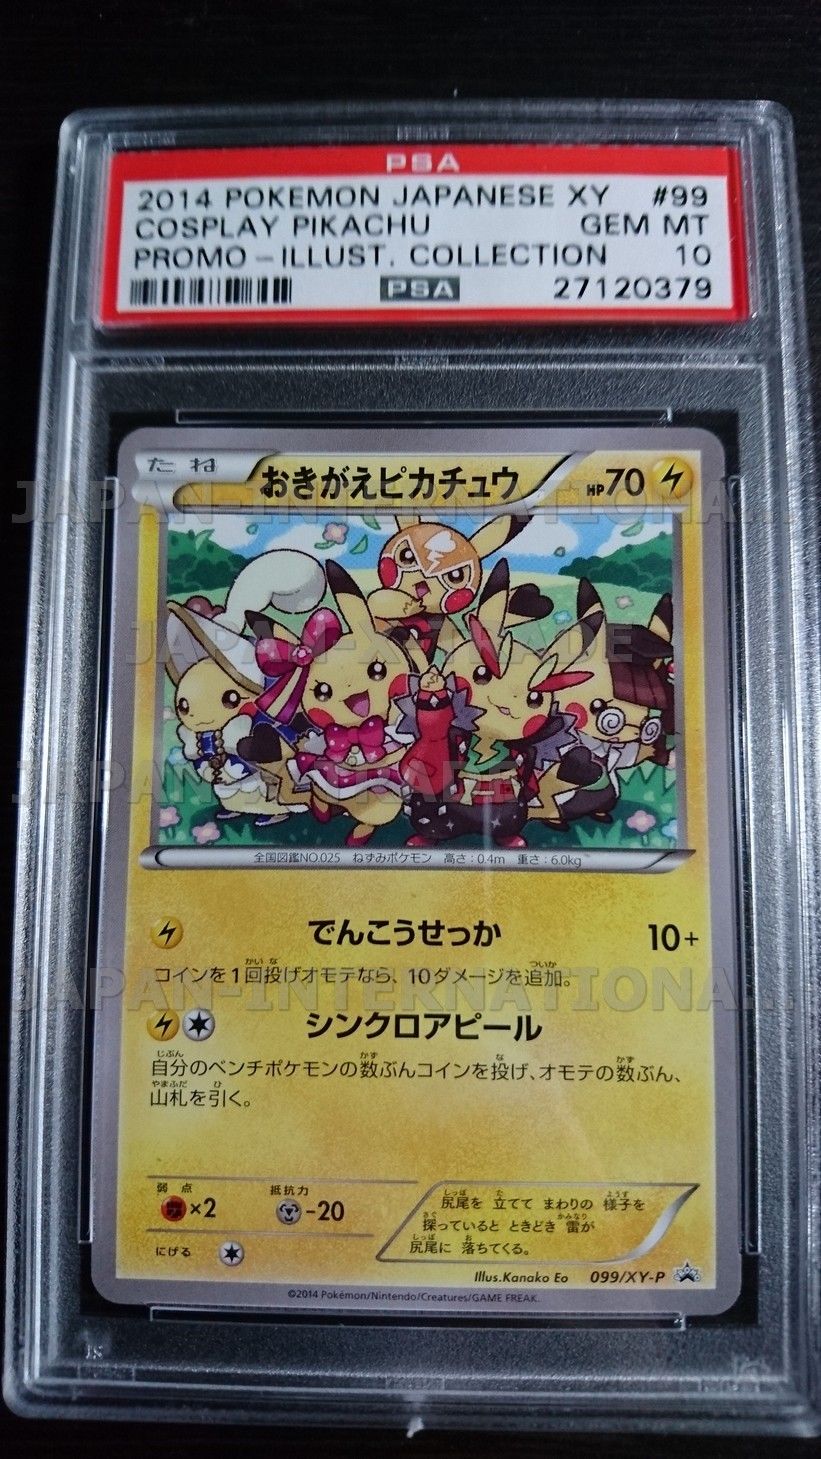 Pokemon Japanese Cosplay Pikachu 099 Xy P Promo Illust Collection Pokemon Individual Cards Collectible Card Games